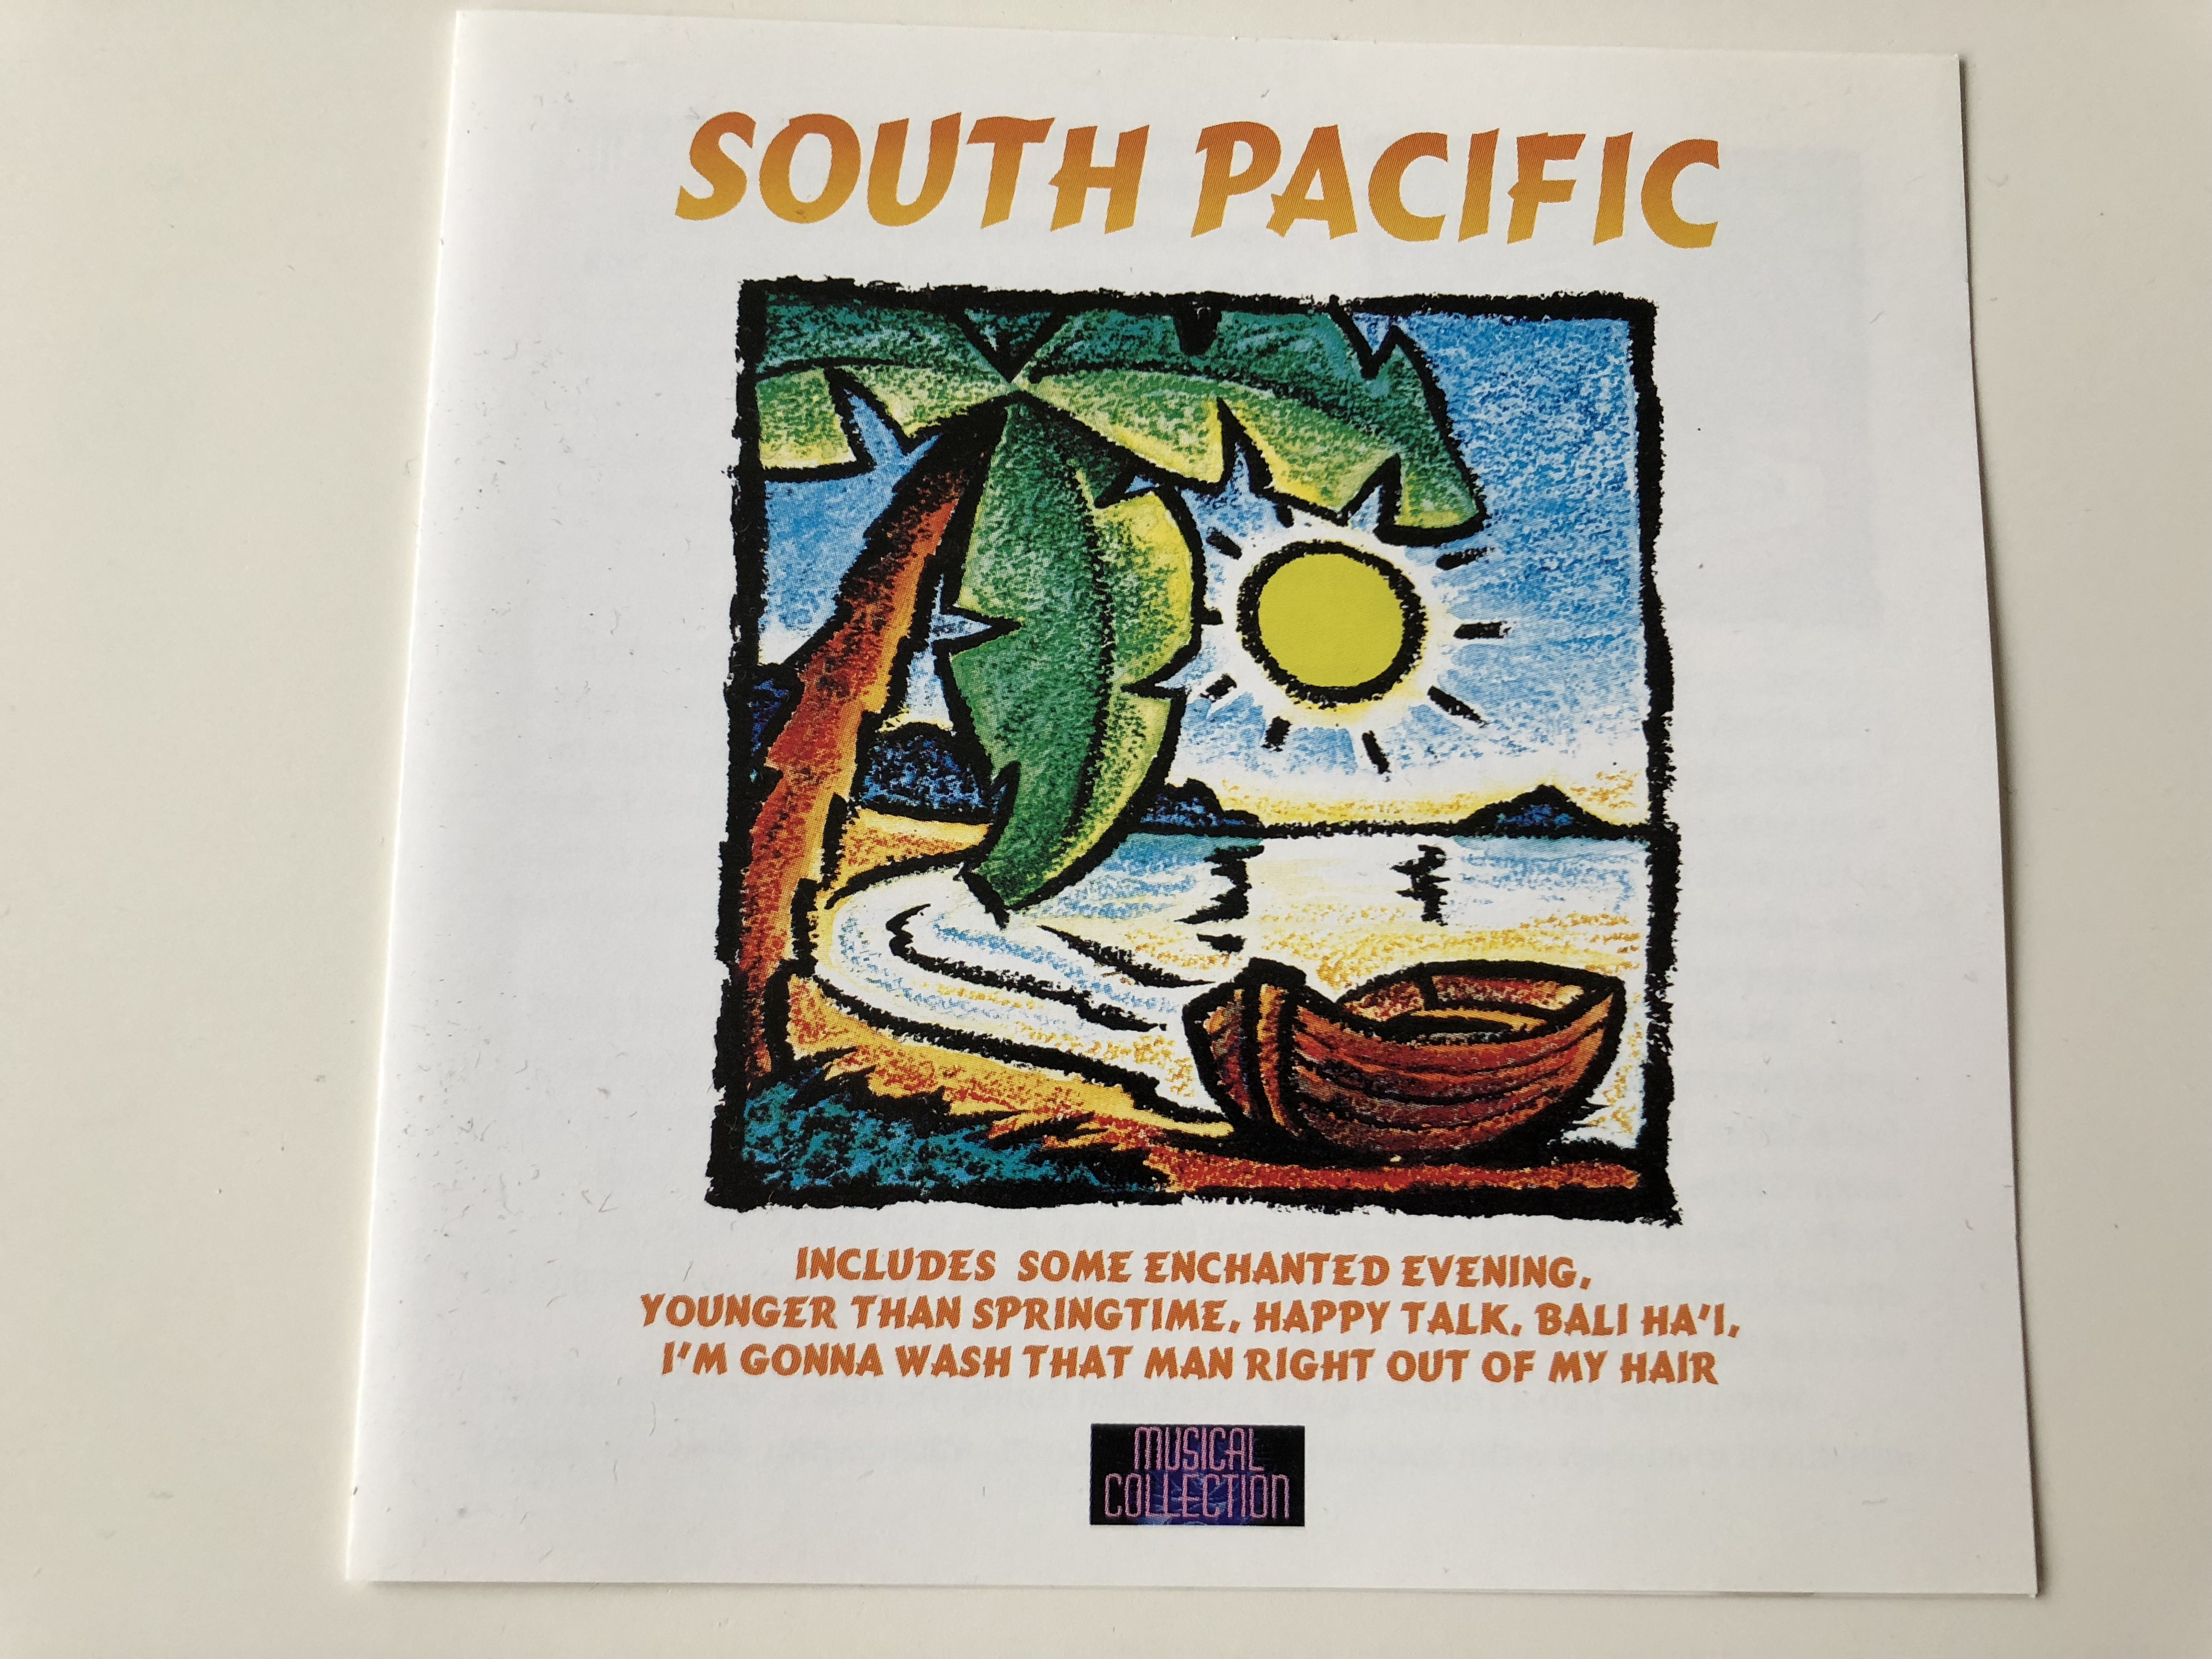 south-pacific-musical-collection-includes-some-enchanted-evening-younger-than-springtime-happy-talk-bali-ha-i-audio-cd-1996-bellevue-1-.jpg